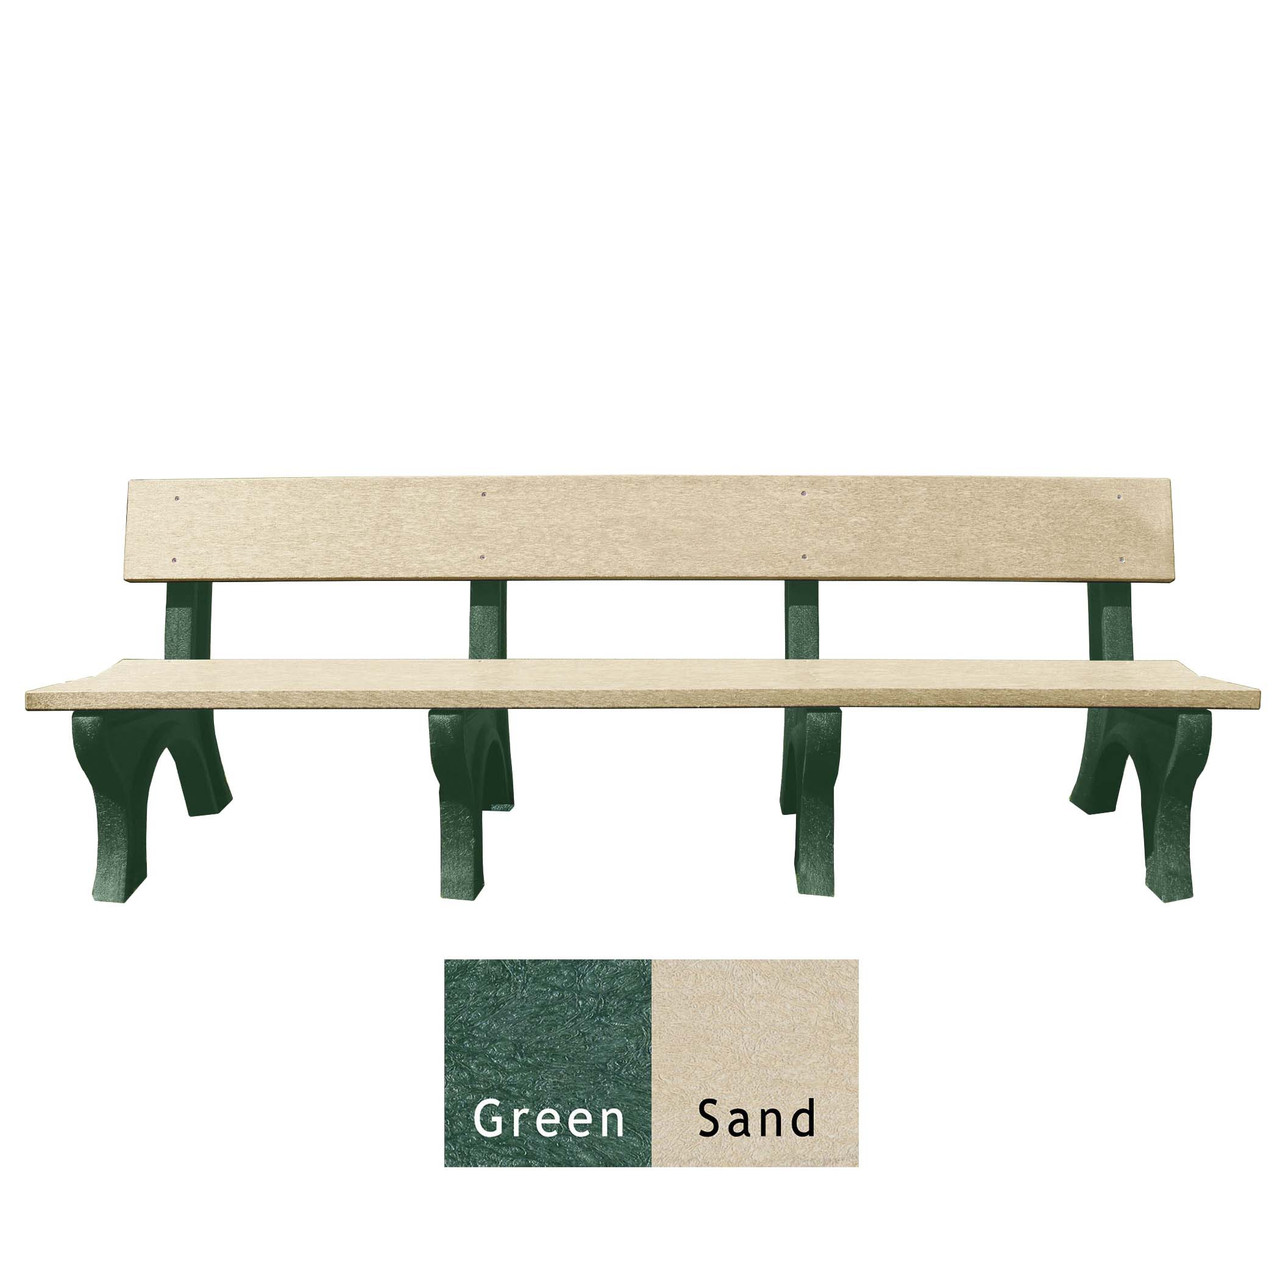 Green and Sand